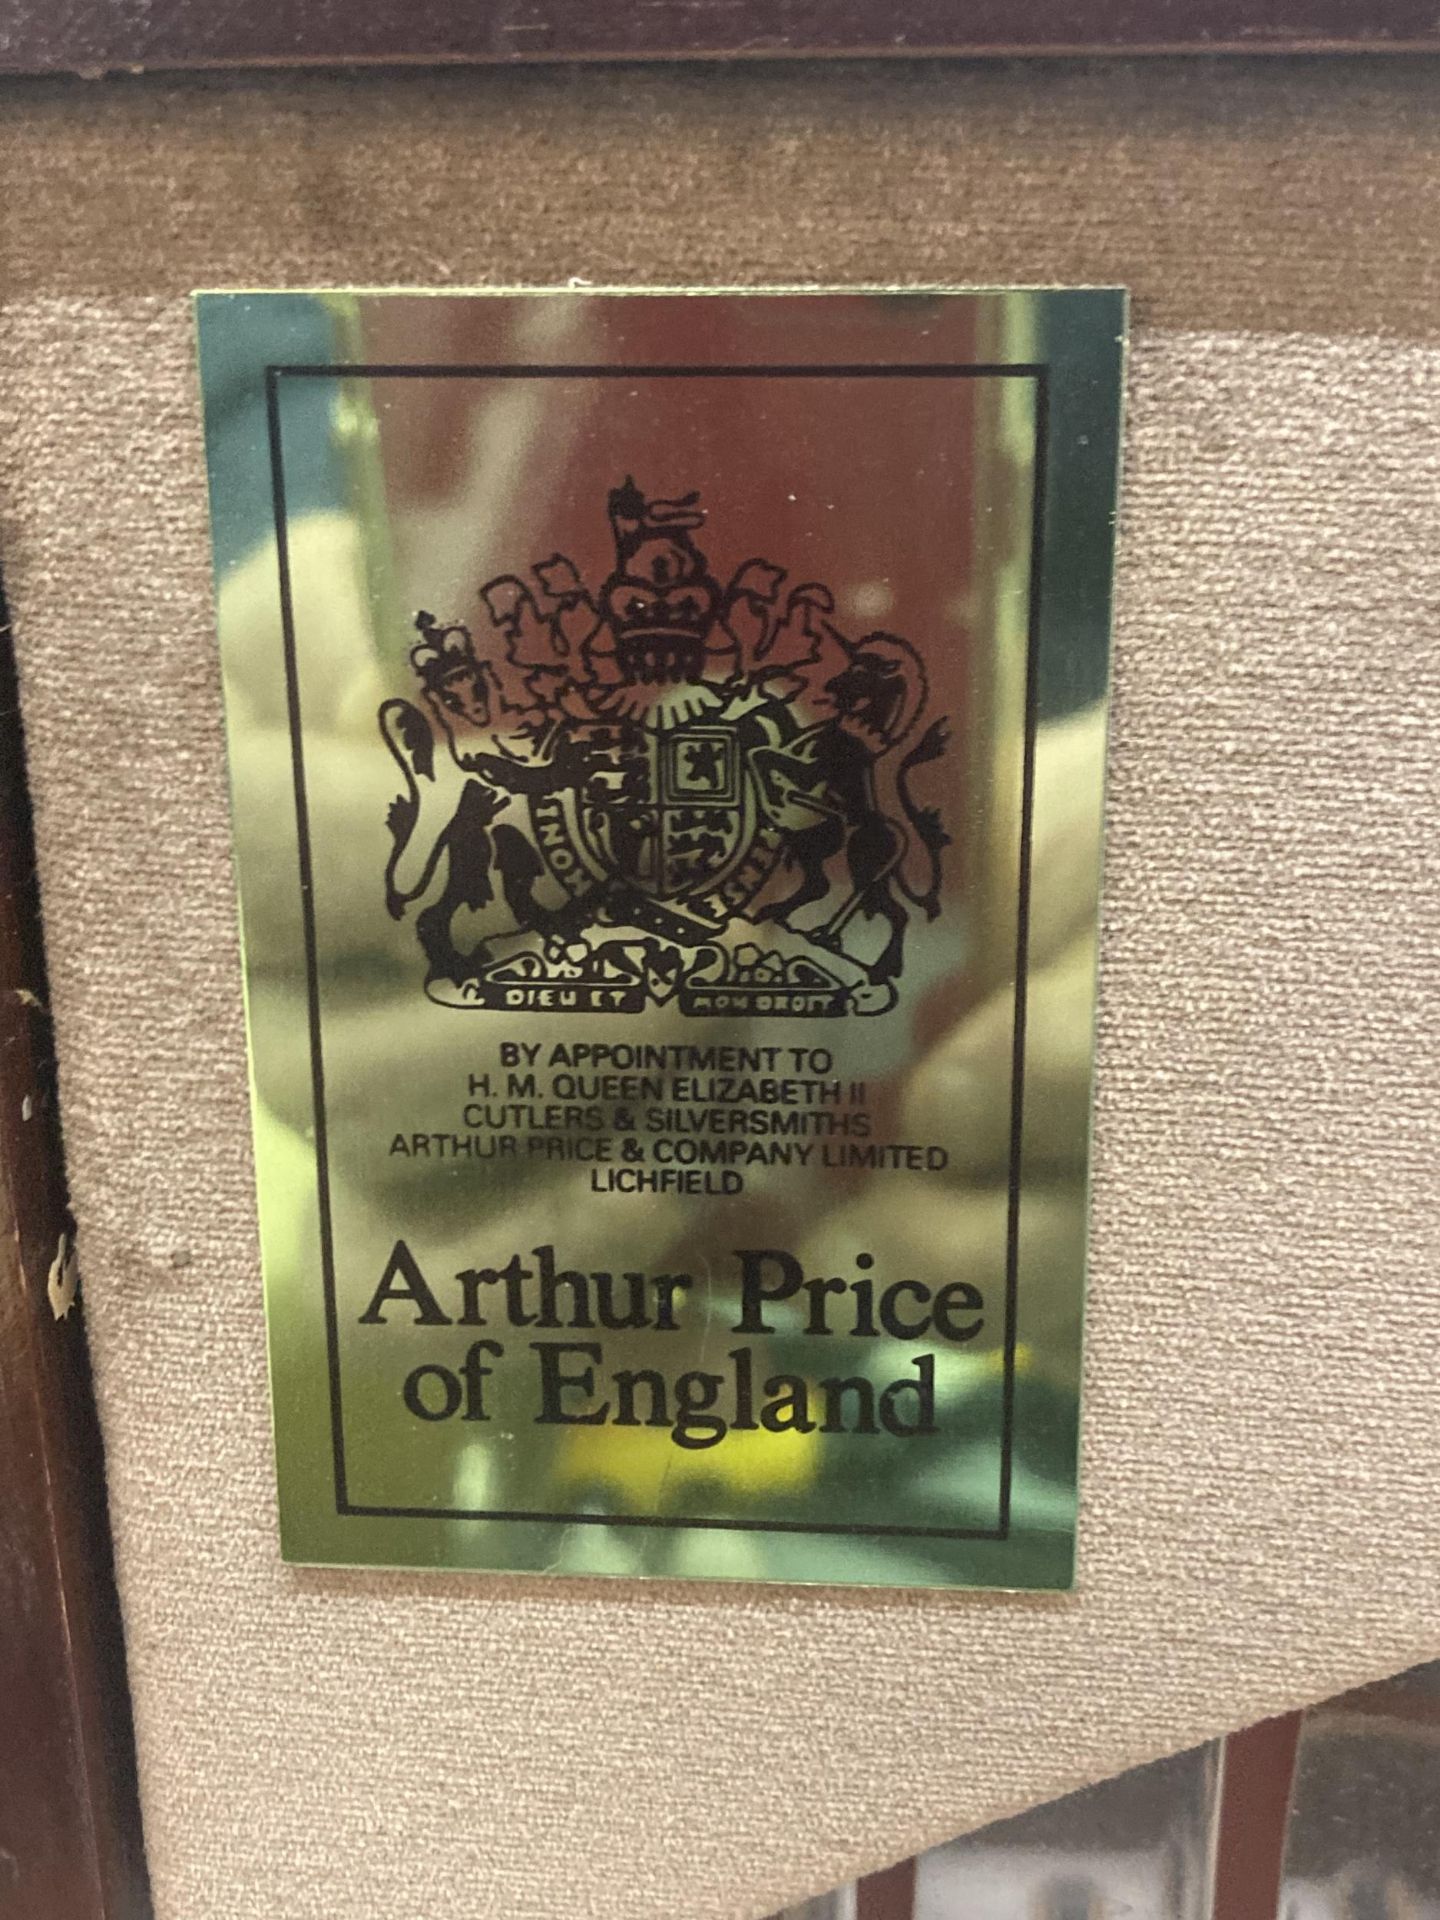 A BOXED ARTHUR PRICE OF ENGLAND CUTLERY SET WHICH COMES WITH A 30 YEAR GUARANTEE - Bild 2 aus 5